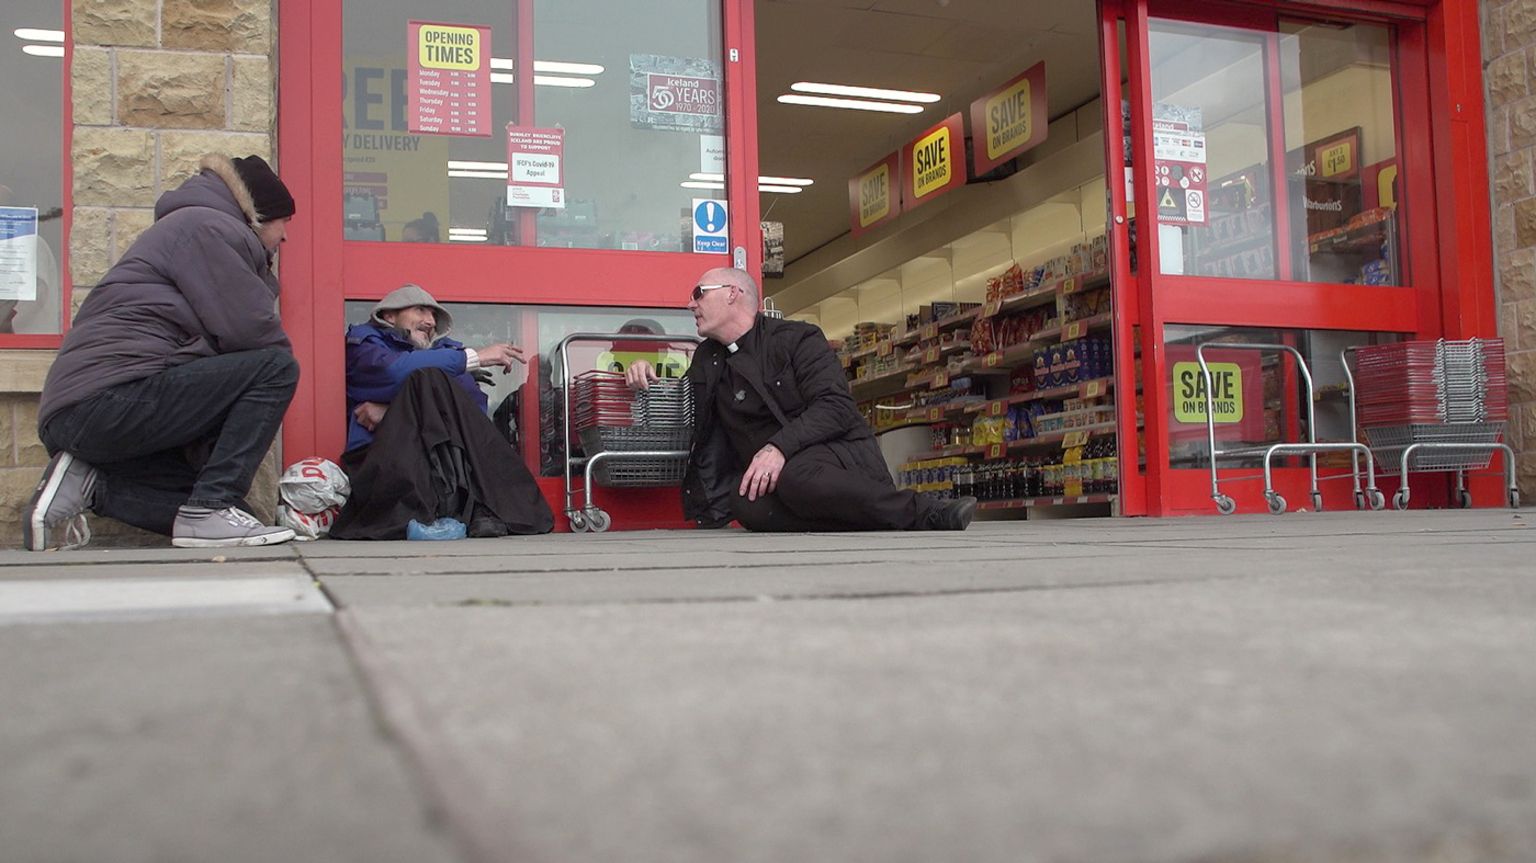 Pastor Mick Fleming talks to a man on the ground outside a shop